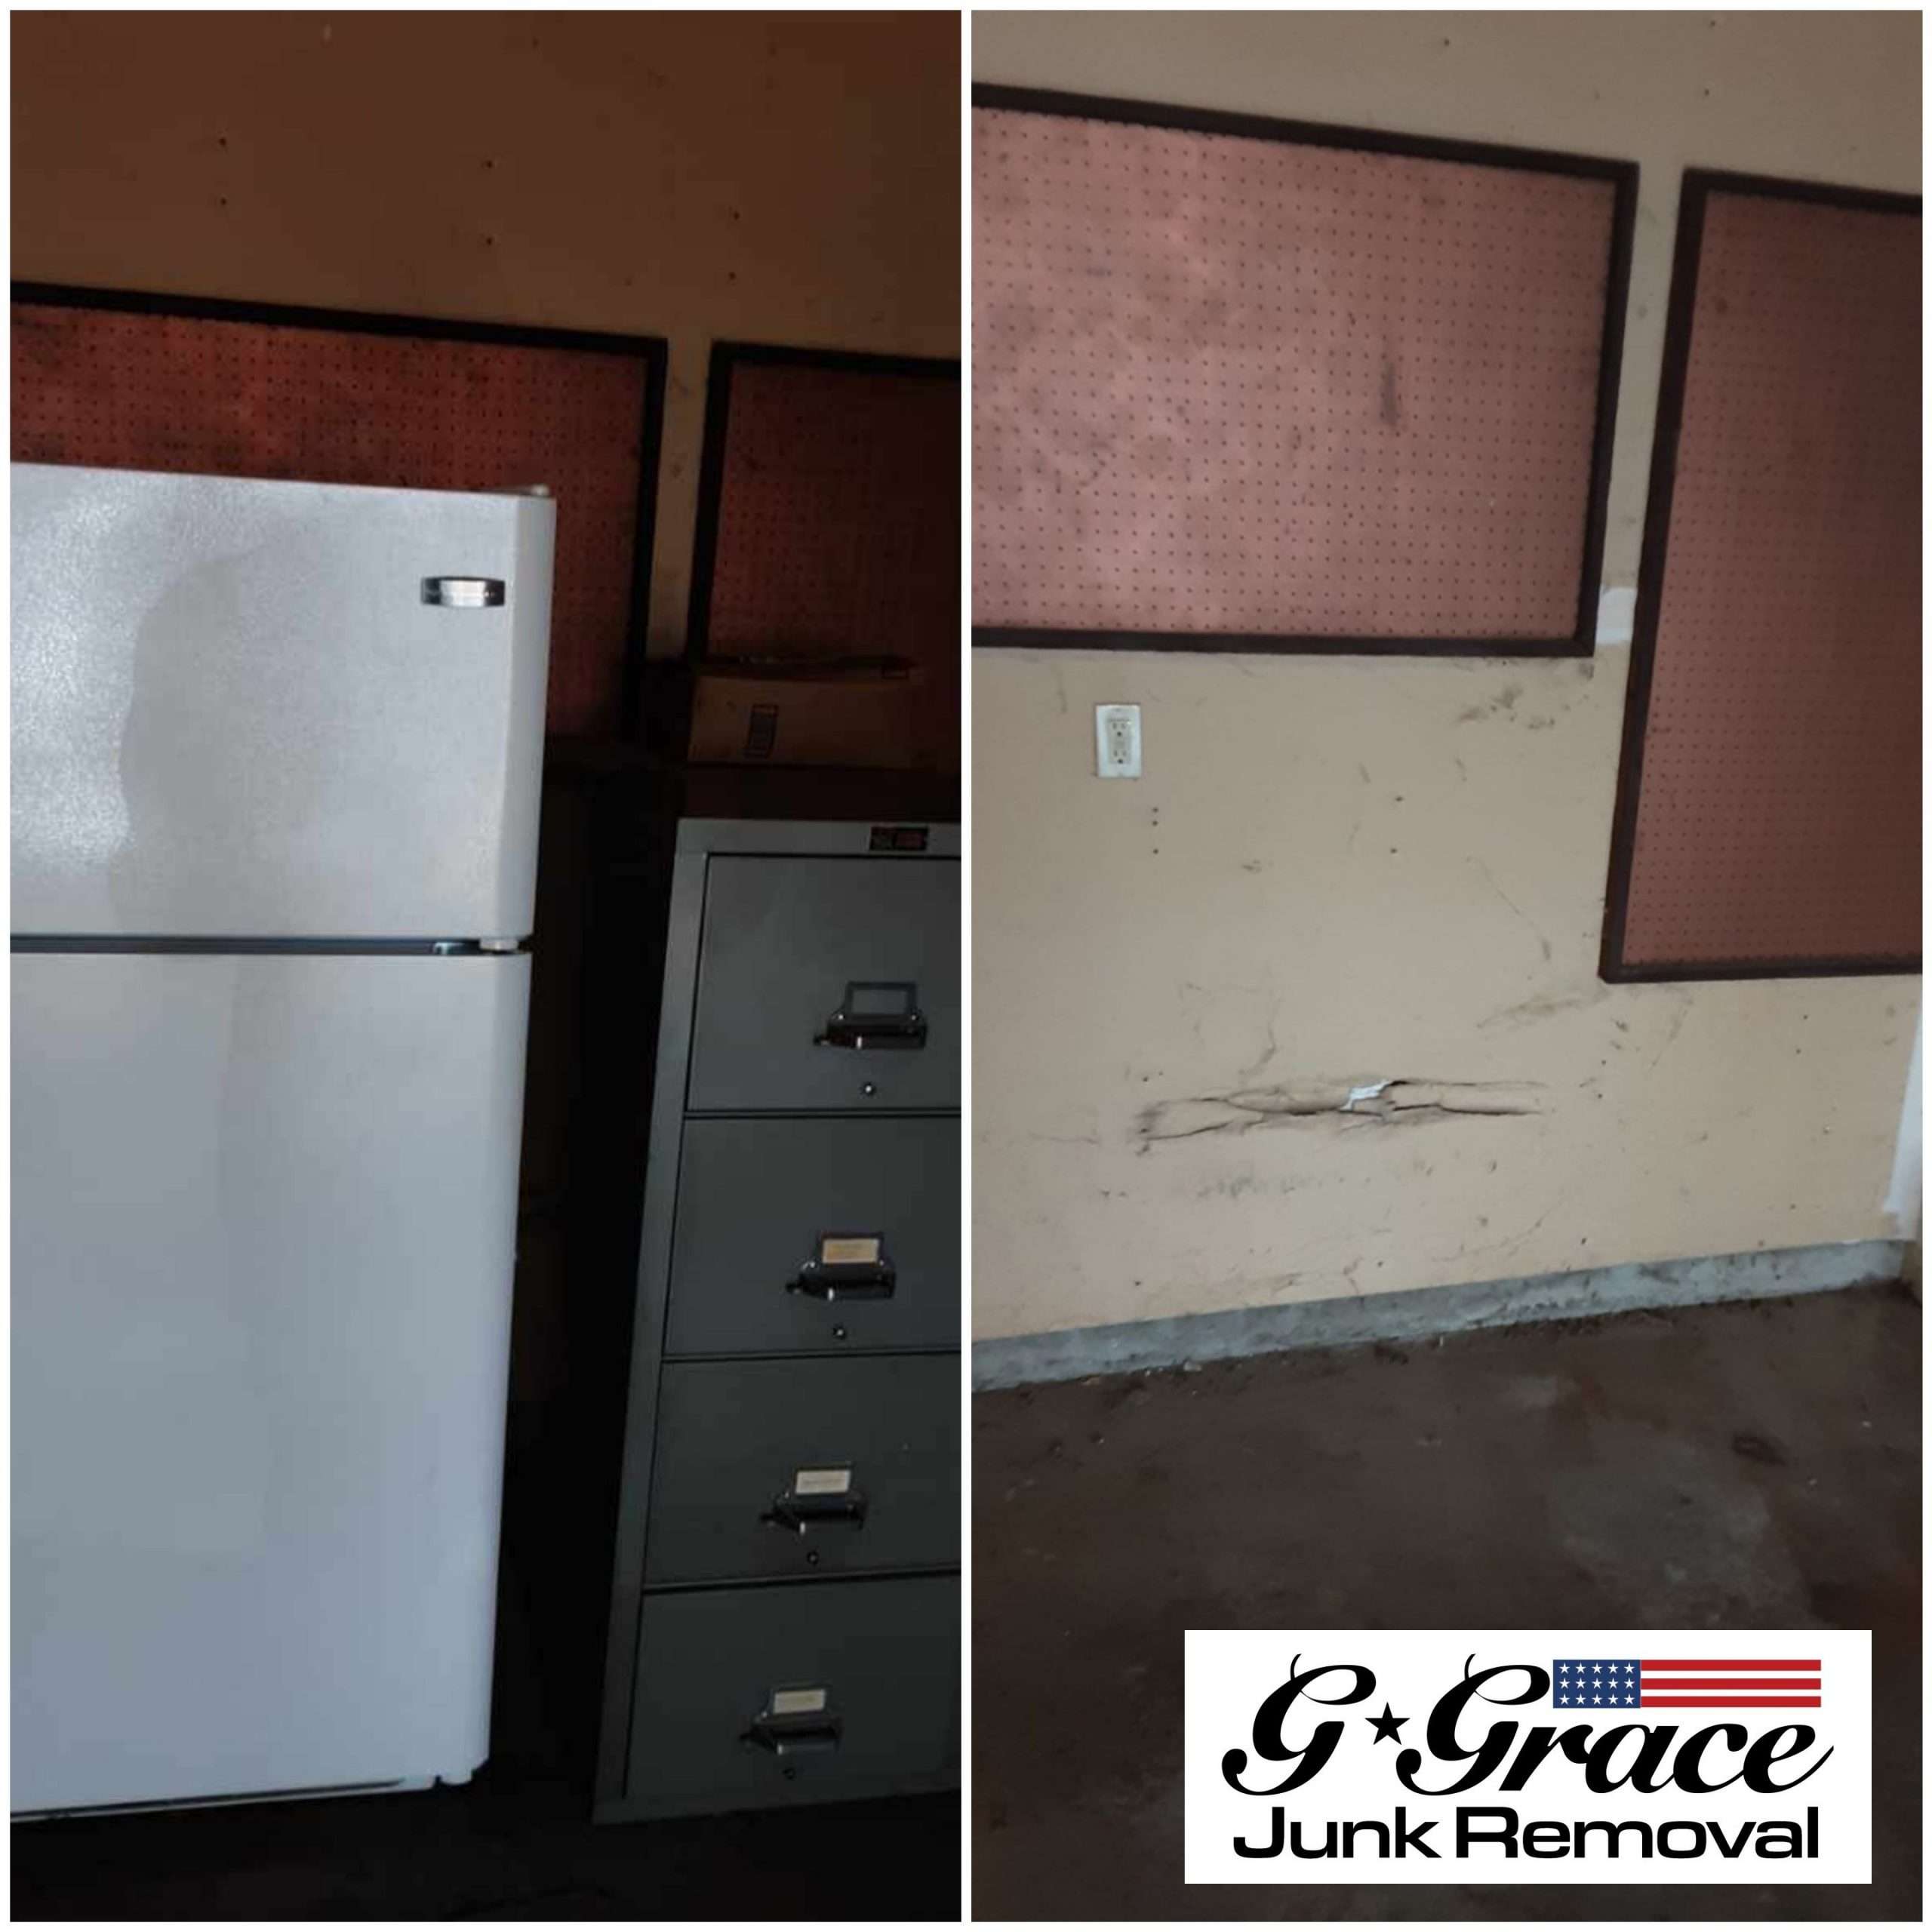 Before and after of junk removal services